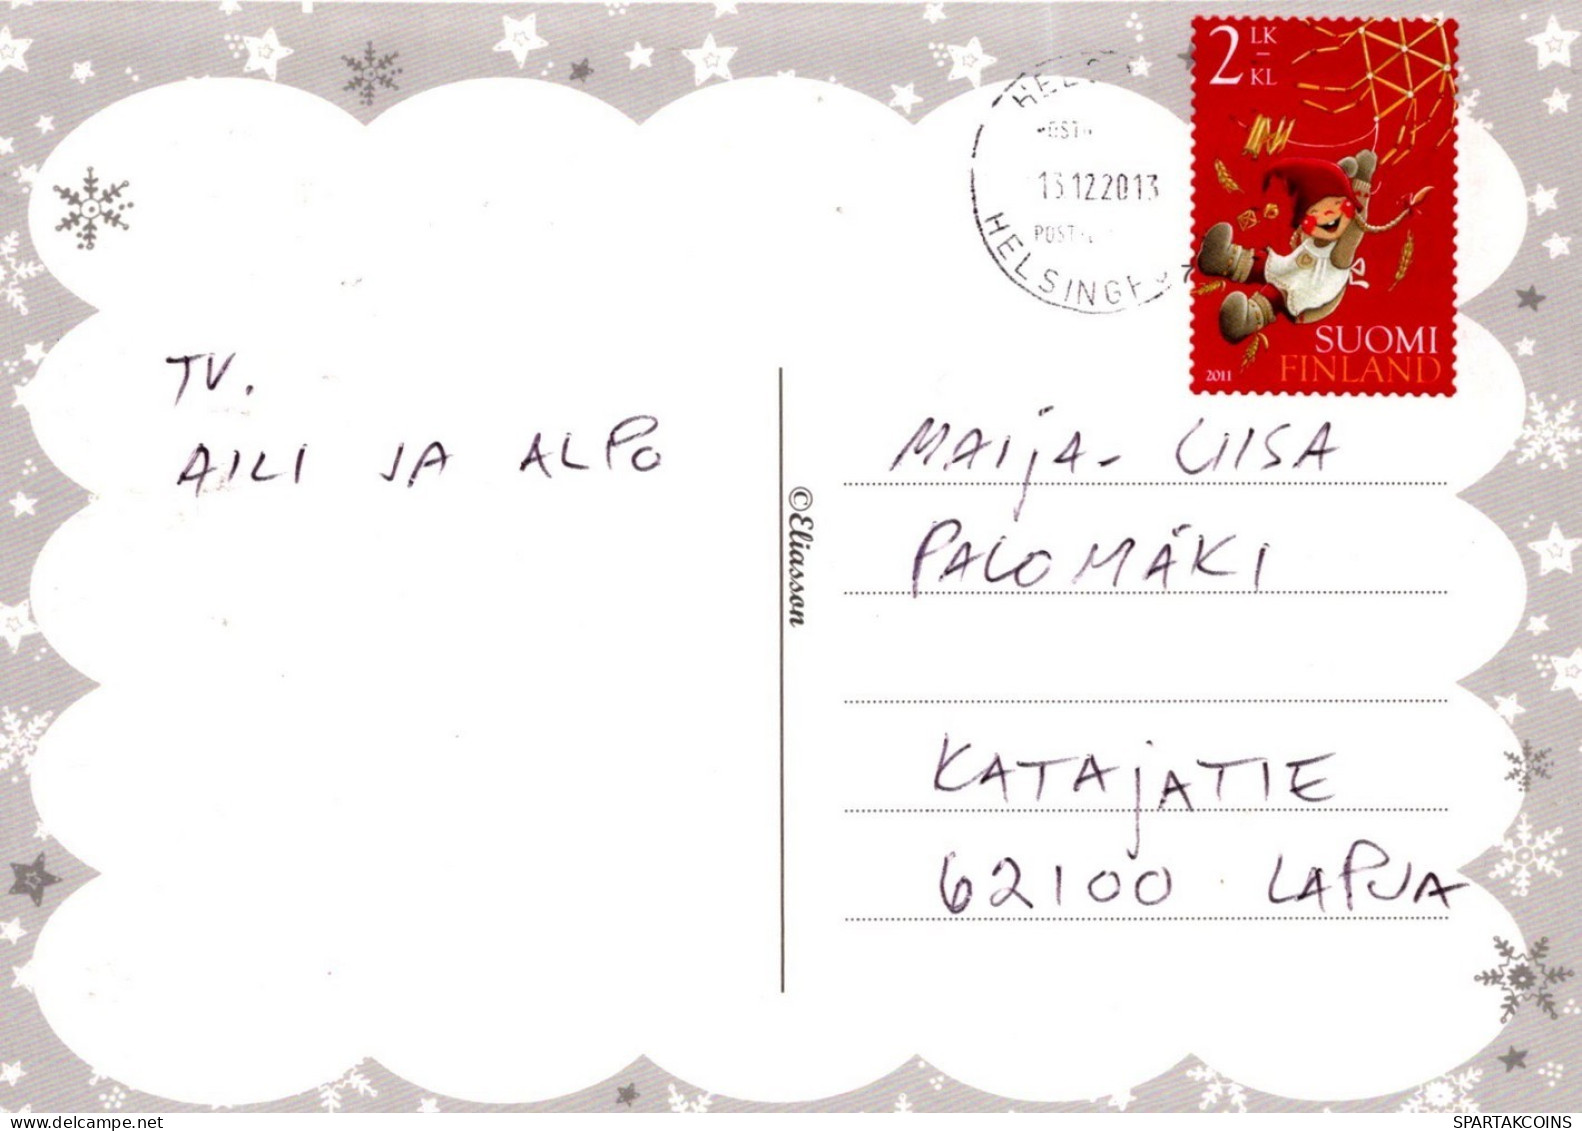 ANGELO Buon Anno Natale Vintage Cartolina CPSM #PAH412.IT - Angels